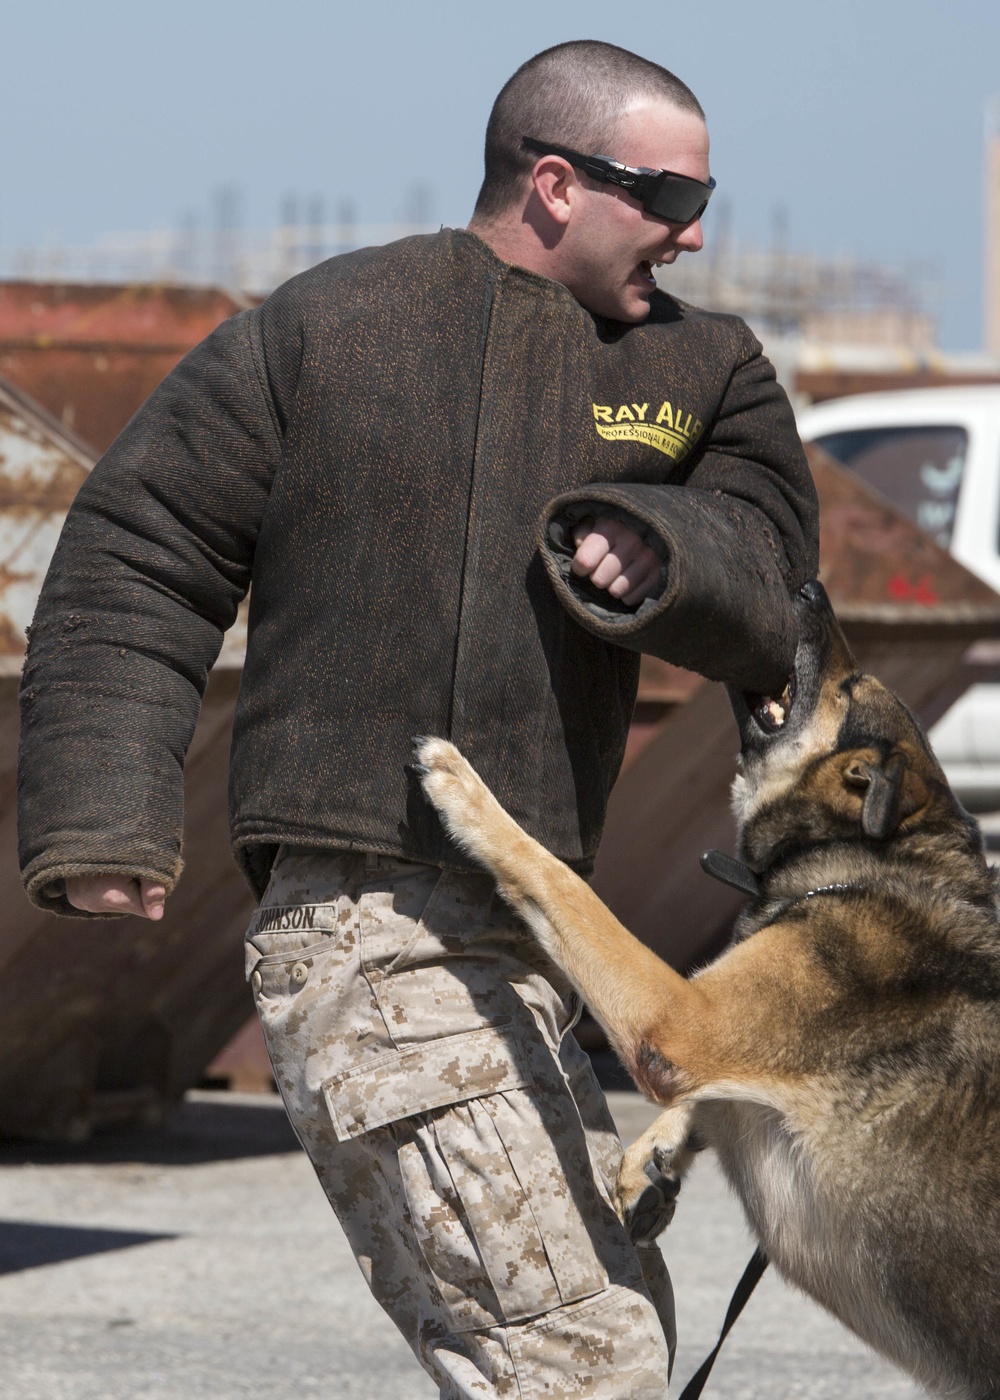 Arkansas, football and military working dogs